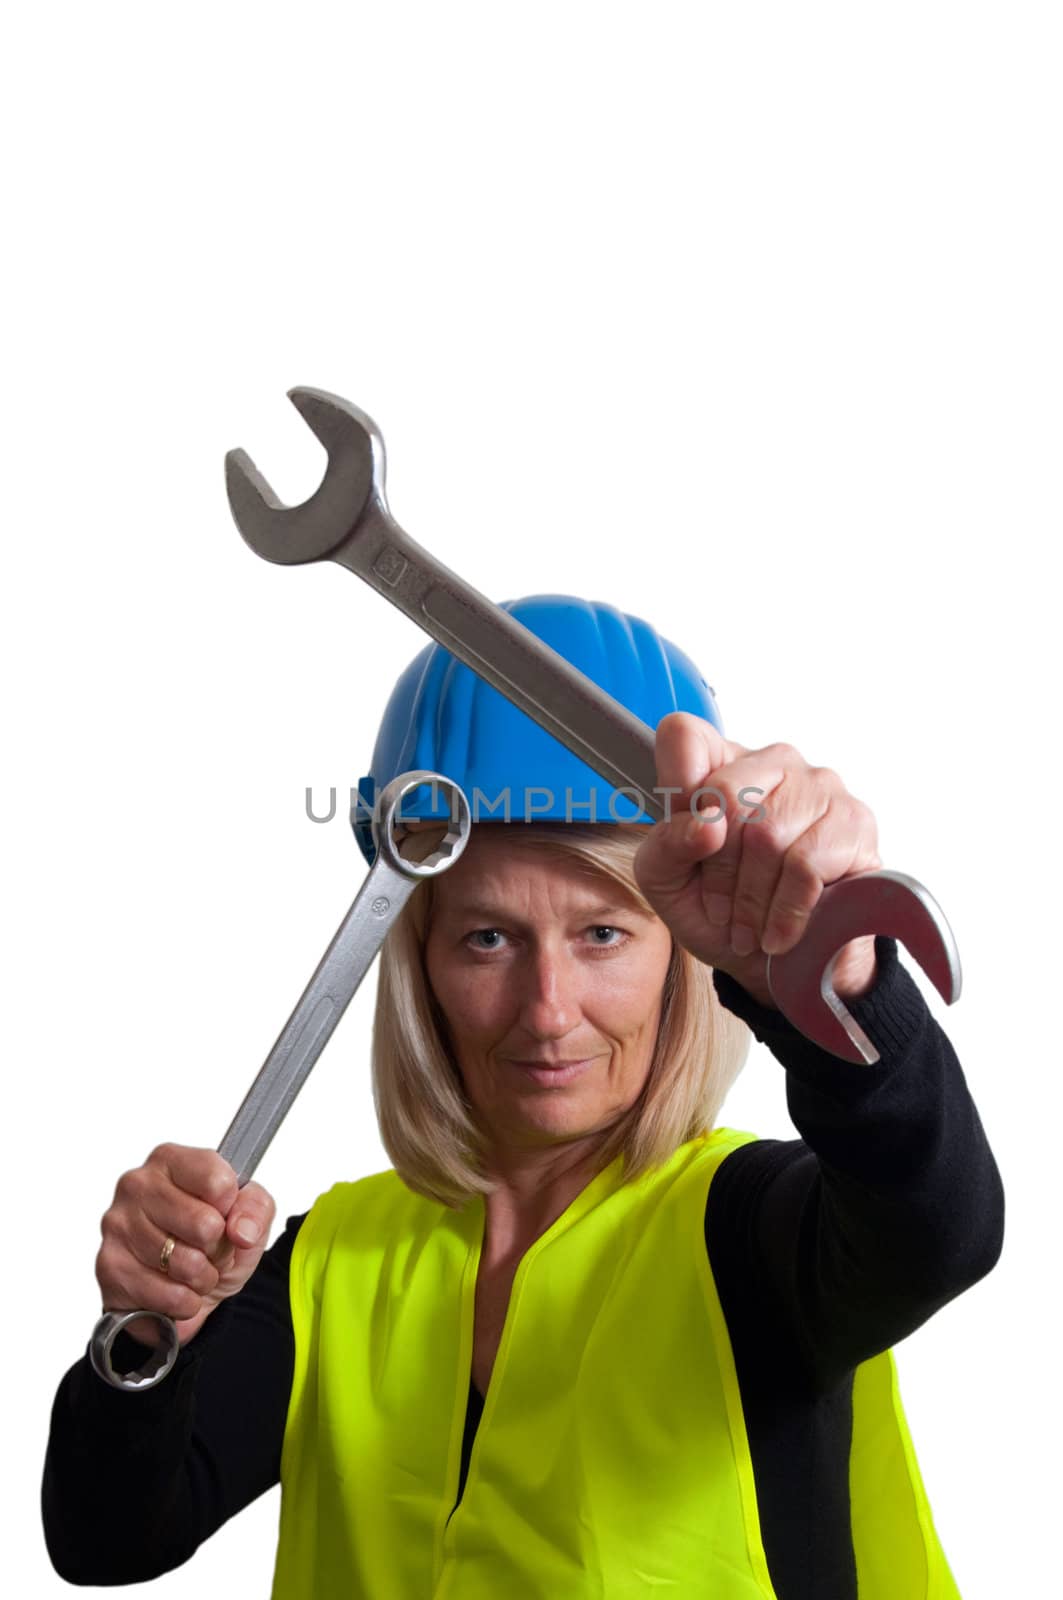 Woman with tools by franz_hein